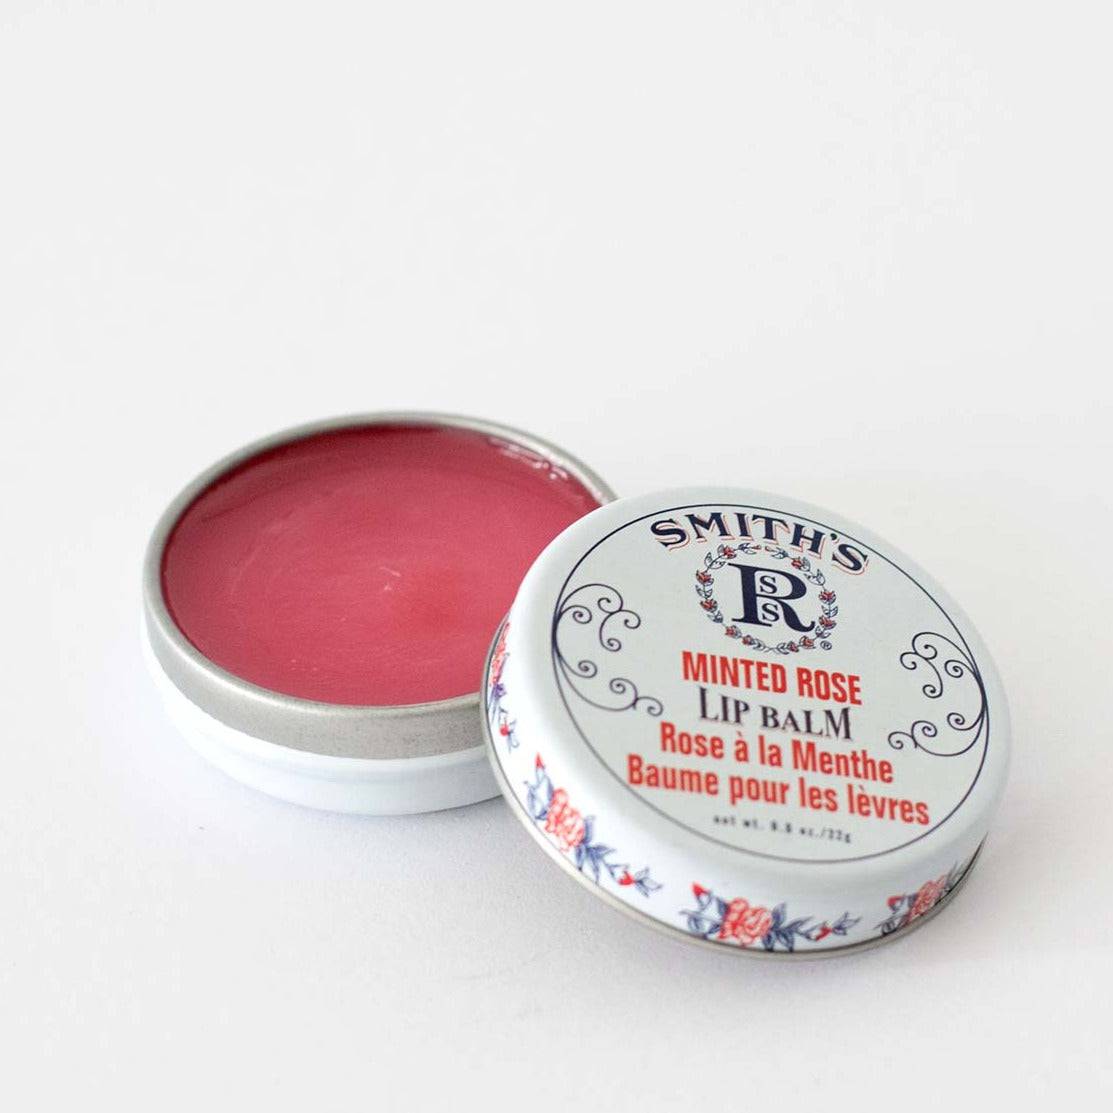 SMITHS MINTED ROSE LIP BALM TIN - Out of the Blue